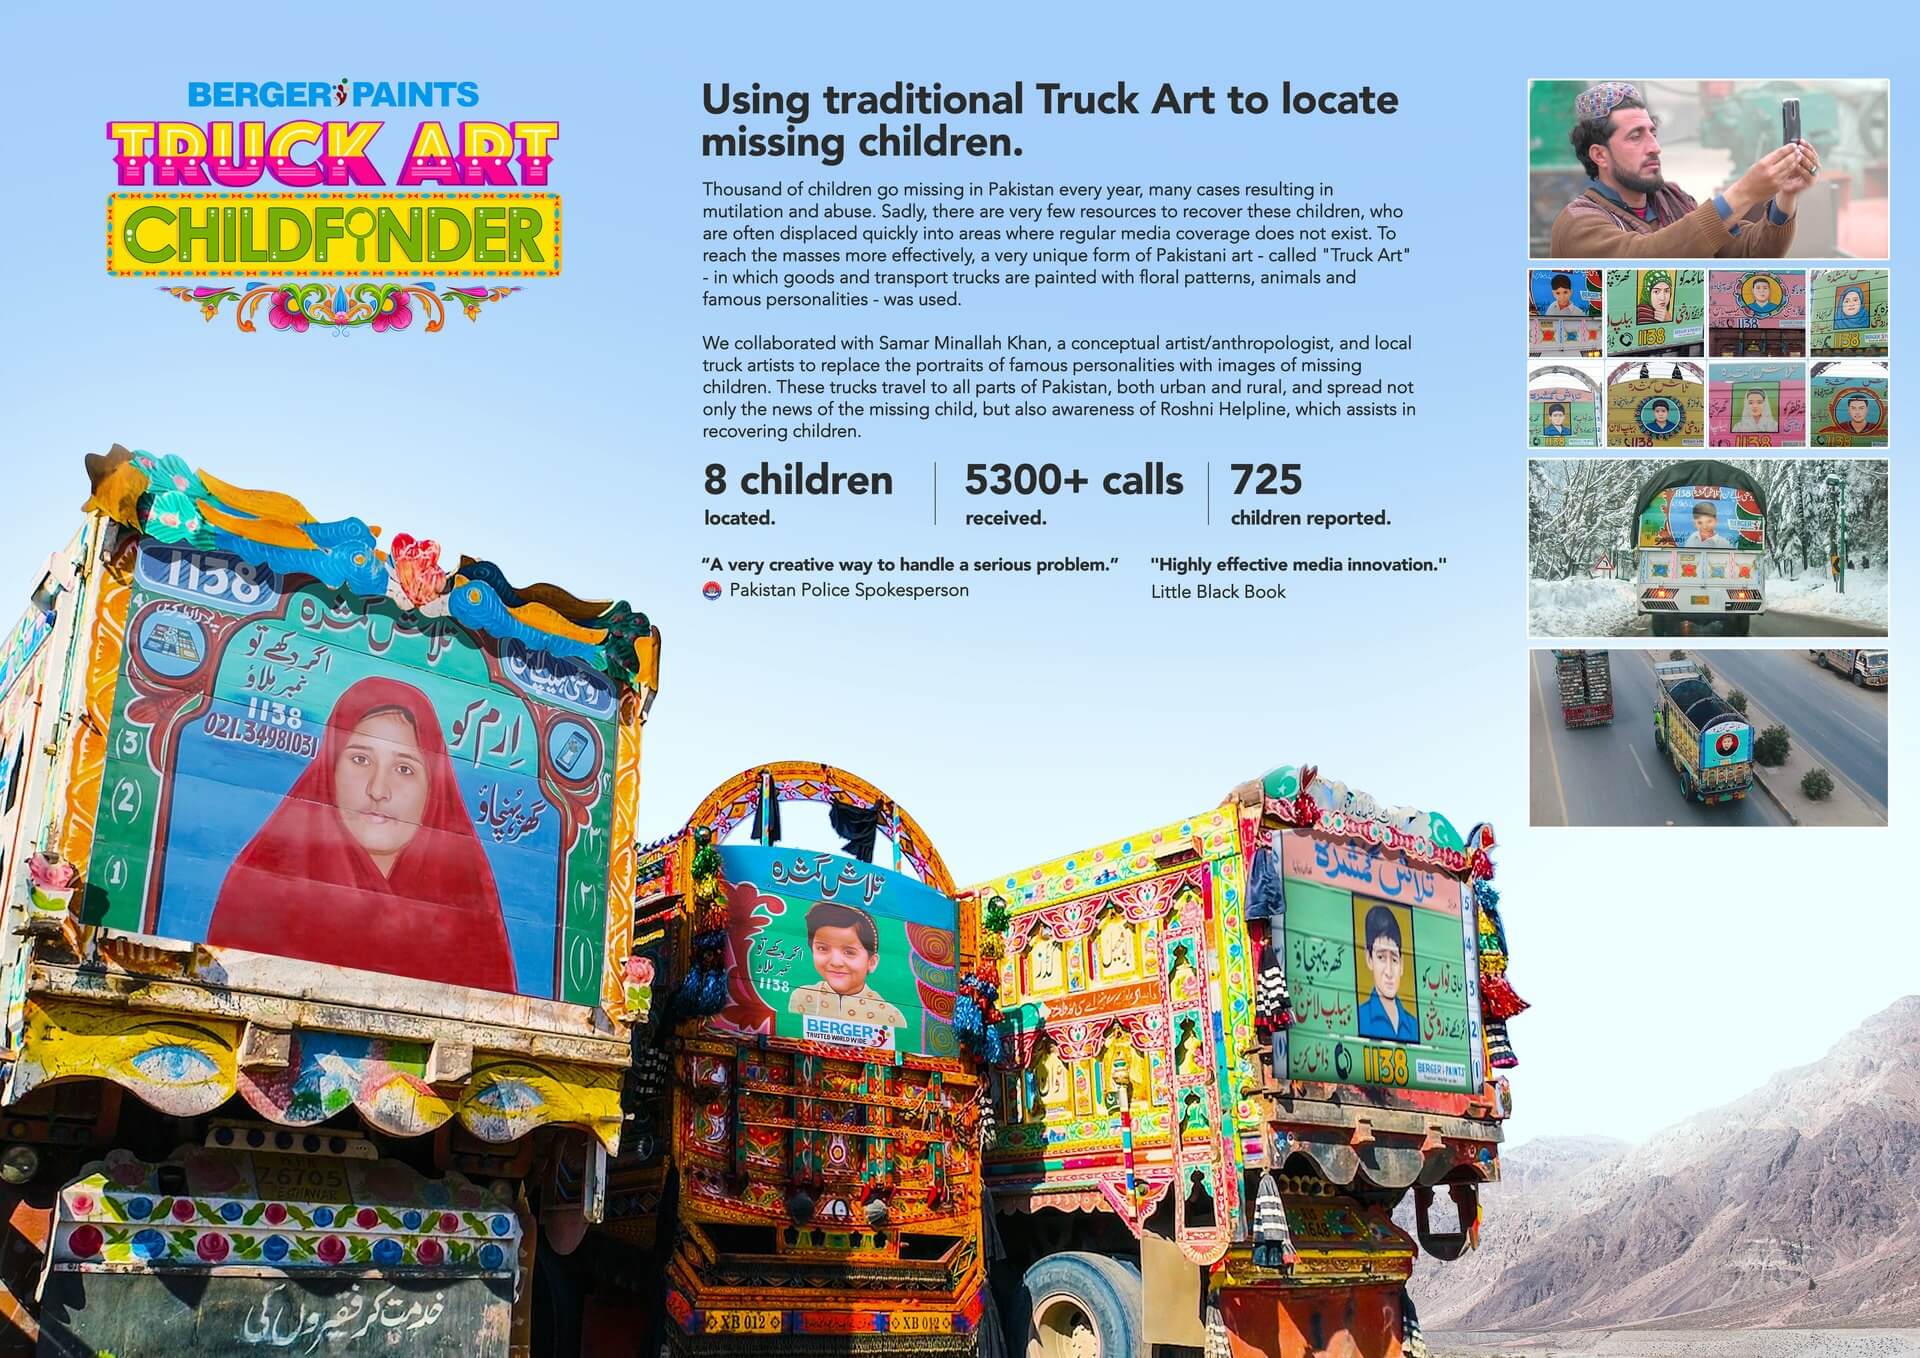 Truck Art Childfinder by Berger Paints